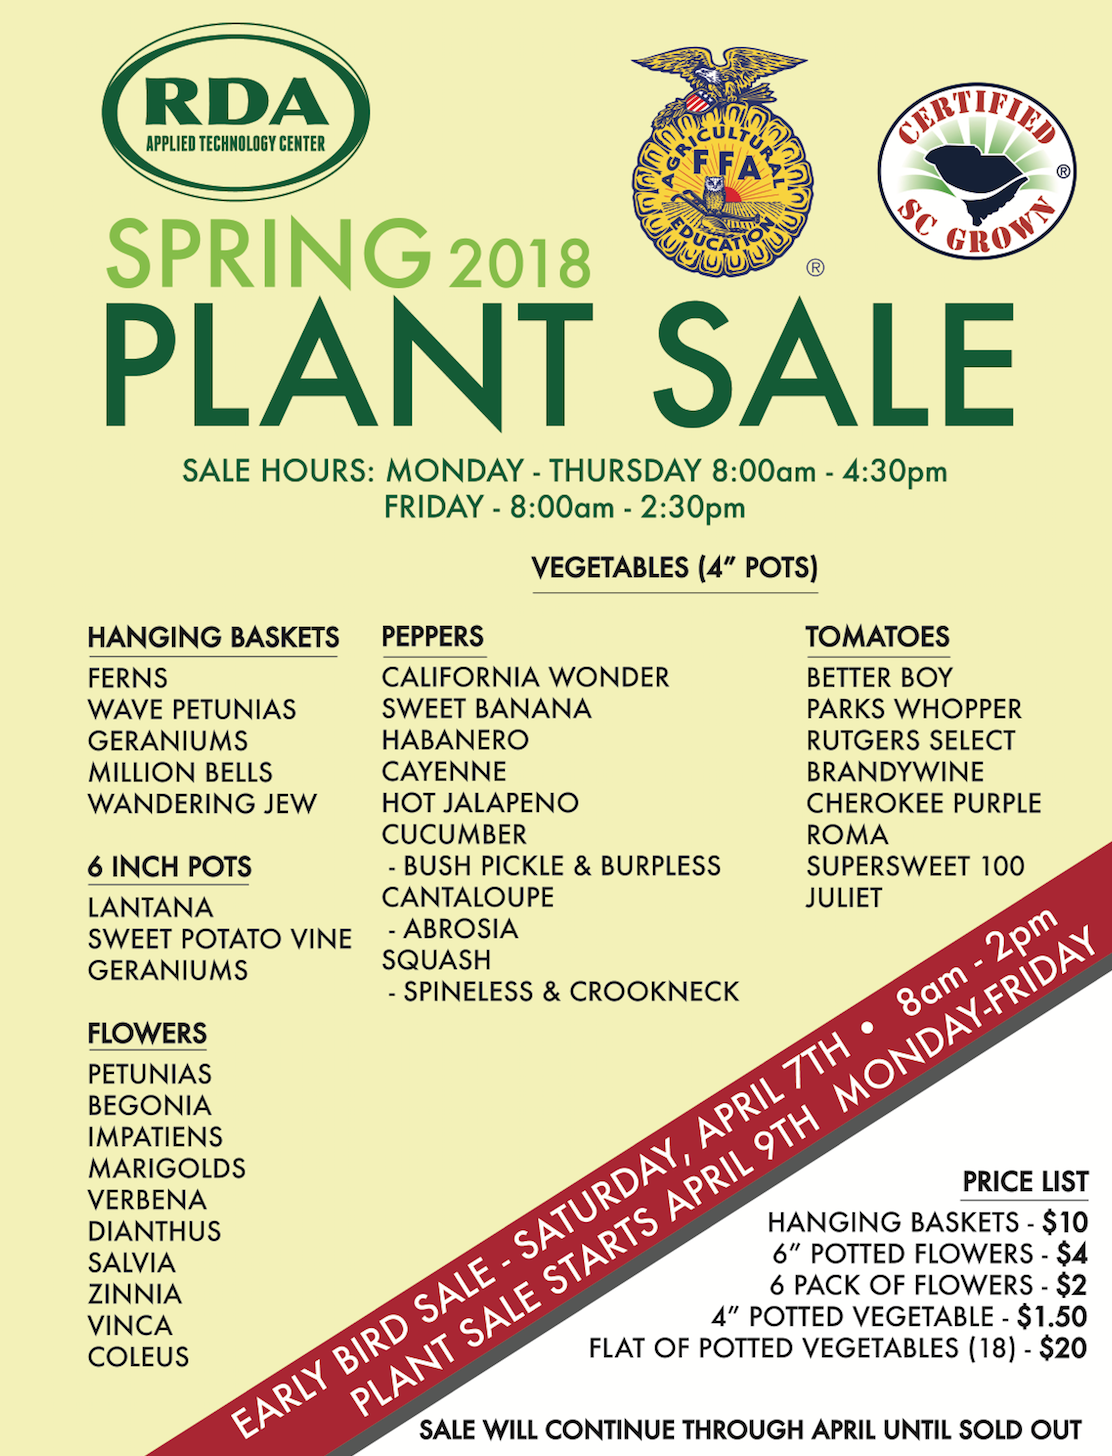 Early Bird Sale begins Saturday, April 7th from 8am - 2pm. Plant sale begins Monday, April 9th Please see our flyer for further details!